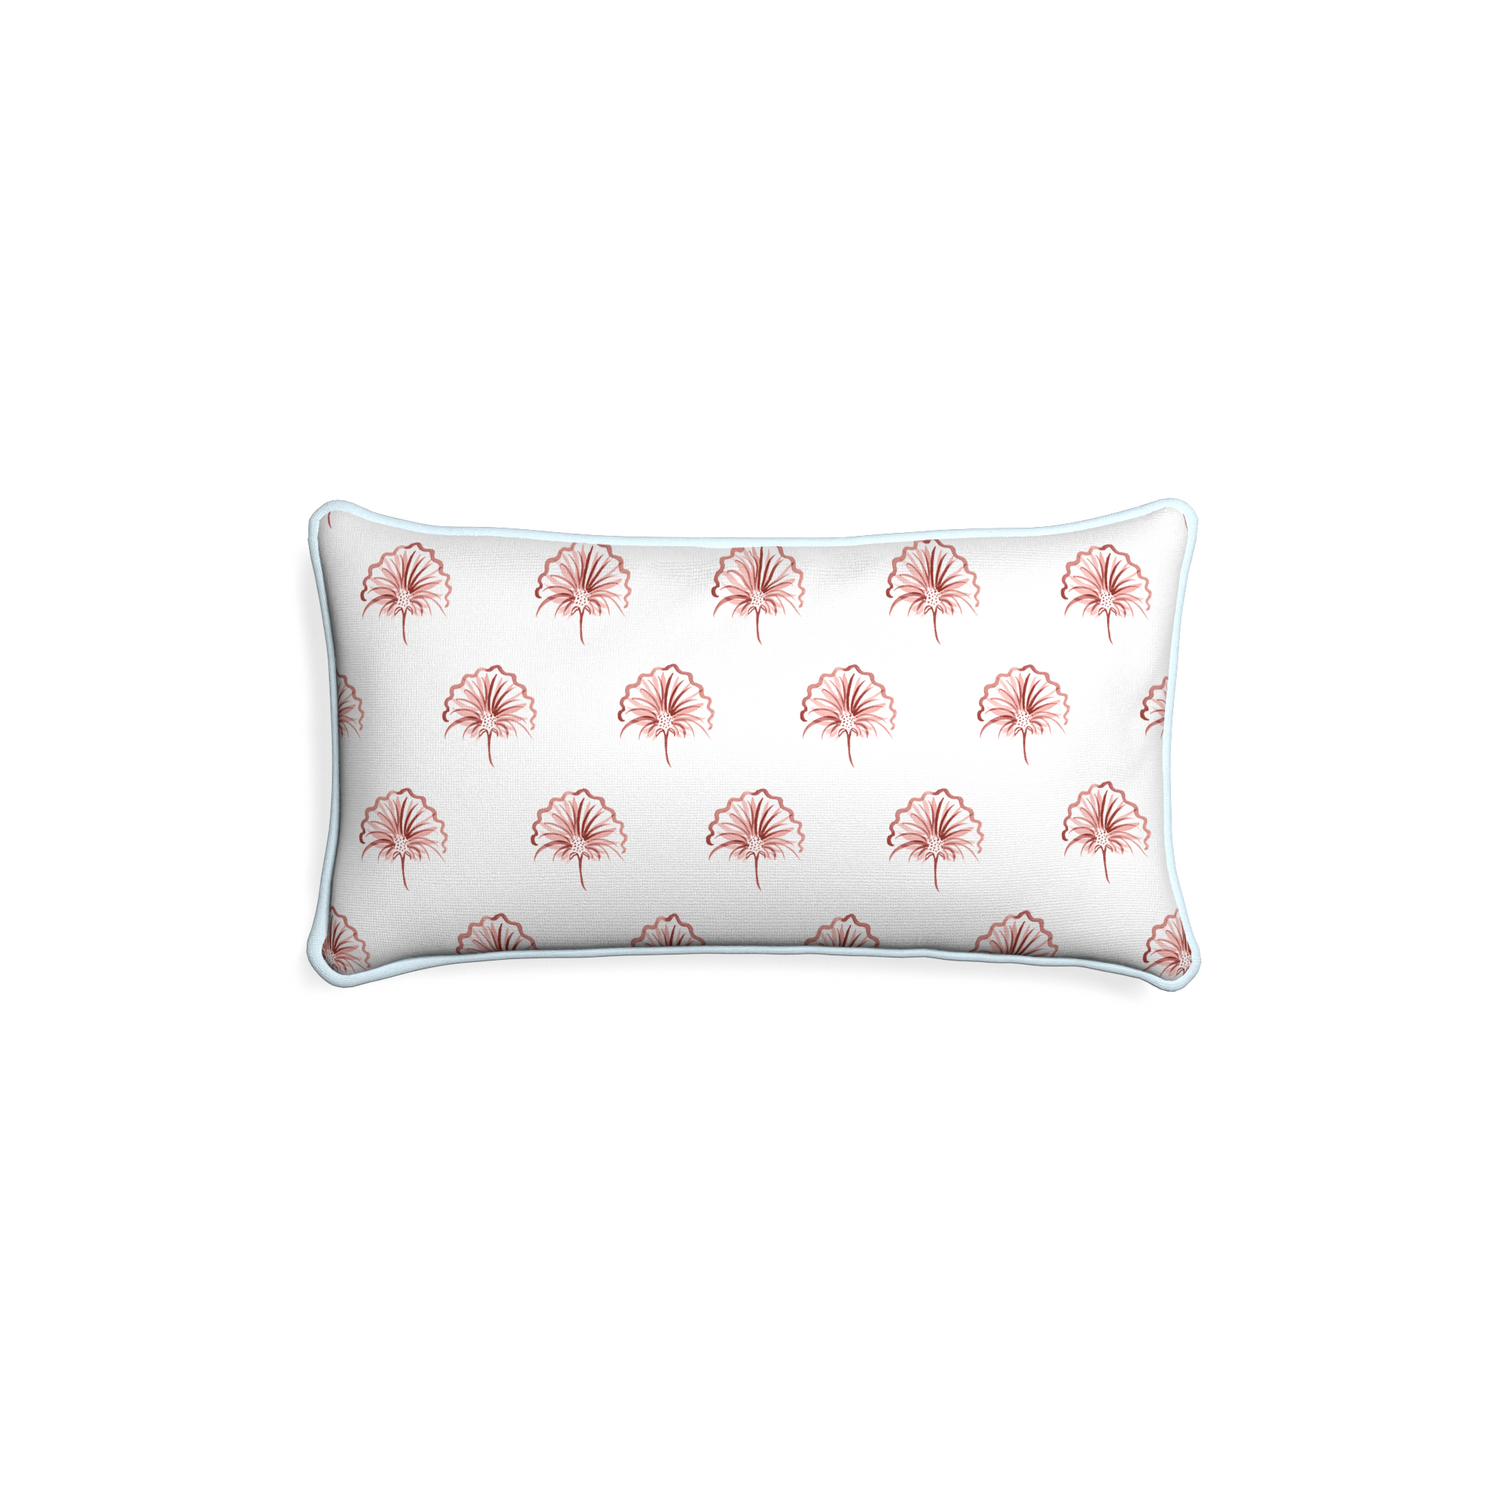 Petite-lumbar penelope rose custom floral pinkpillow with powder piping on white background